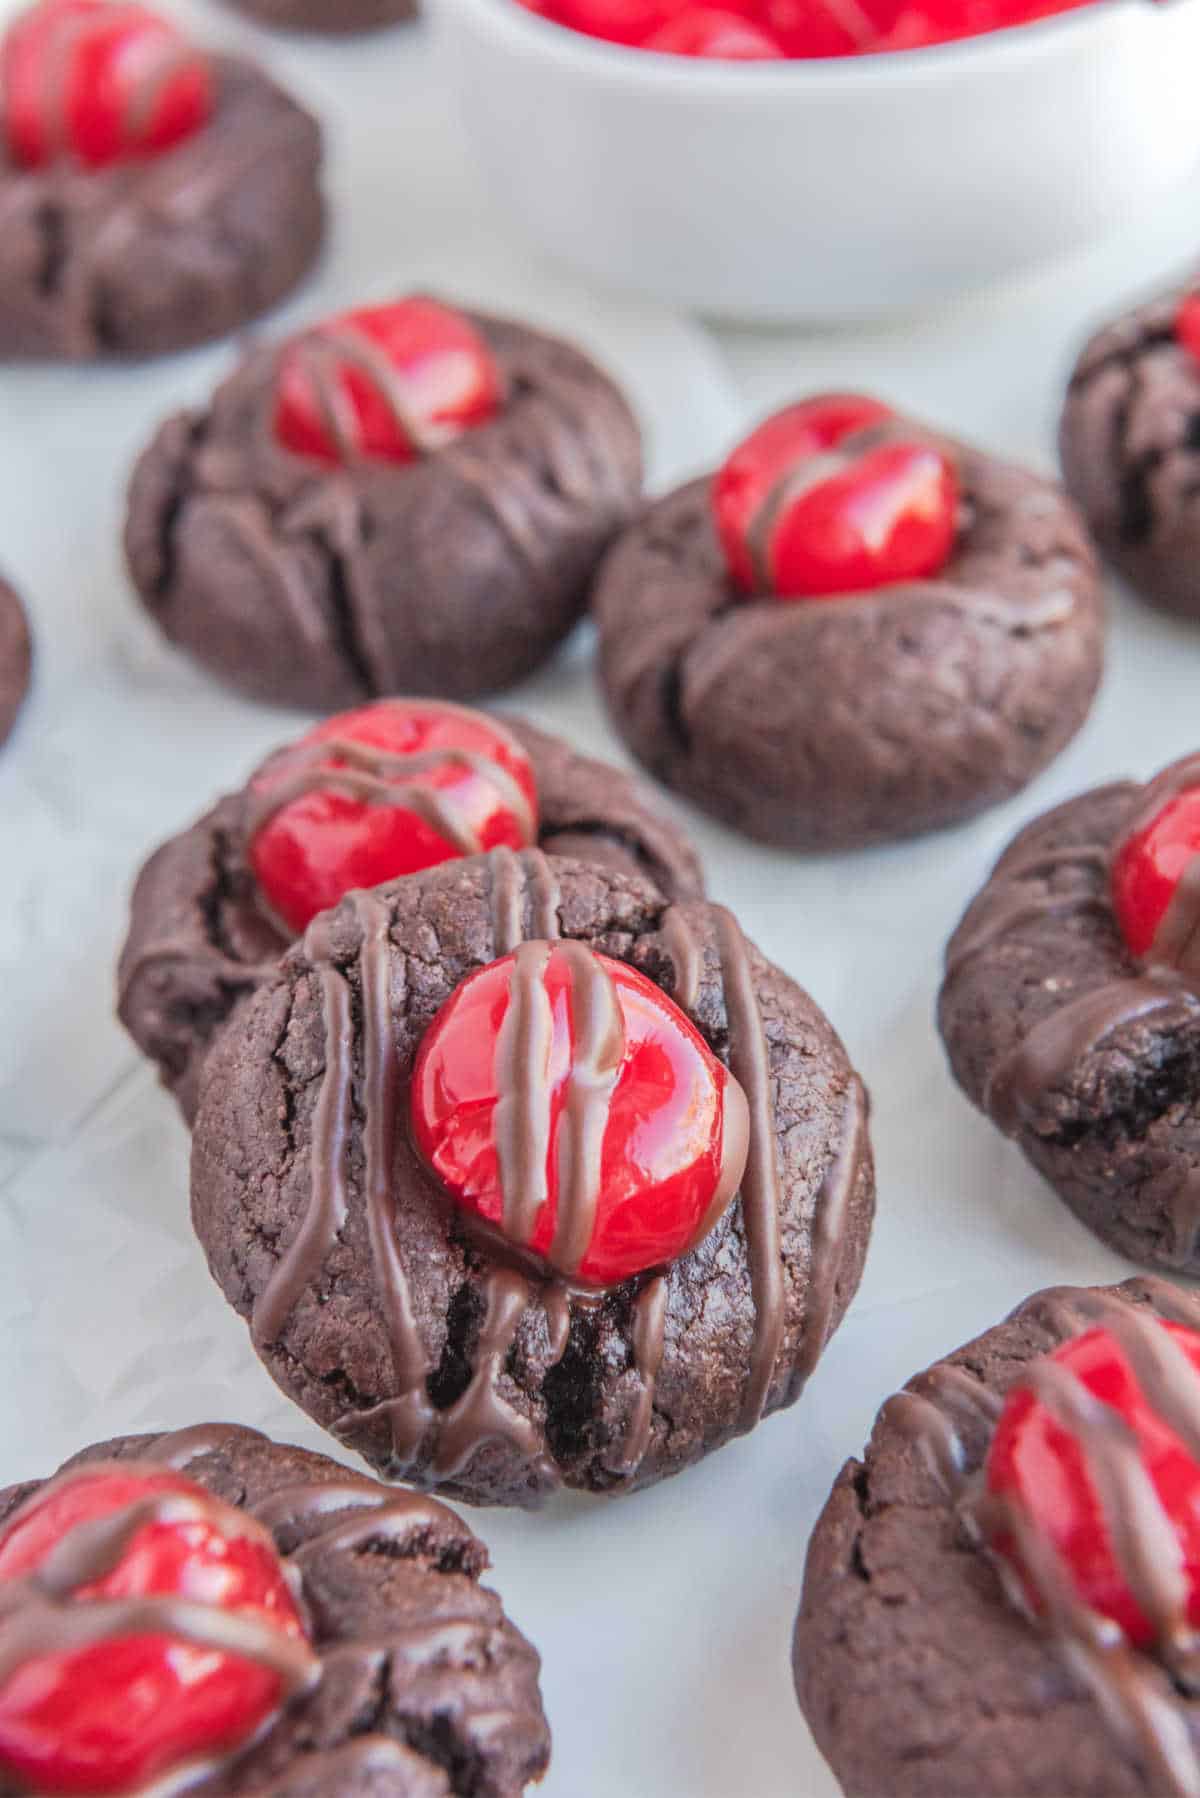 A group of chocolate cherry cookies.